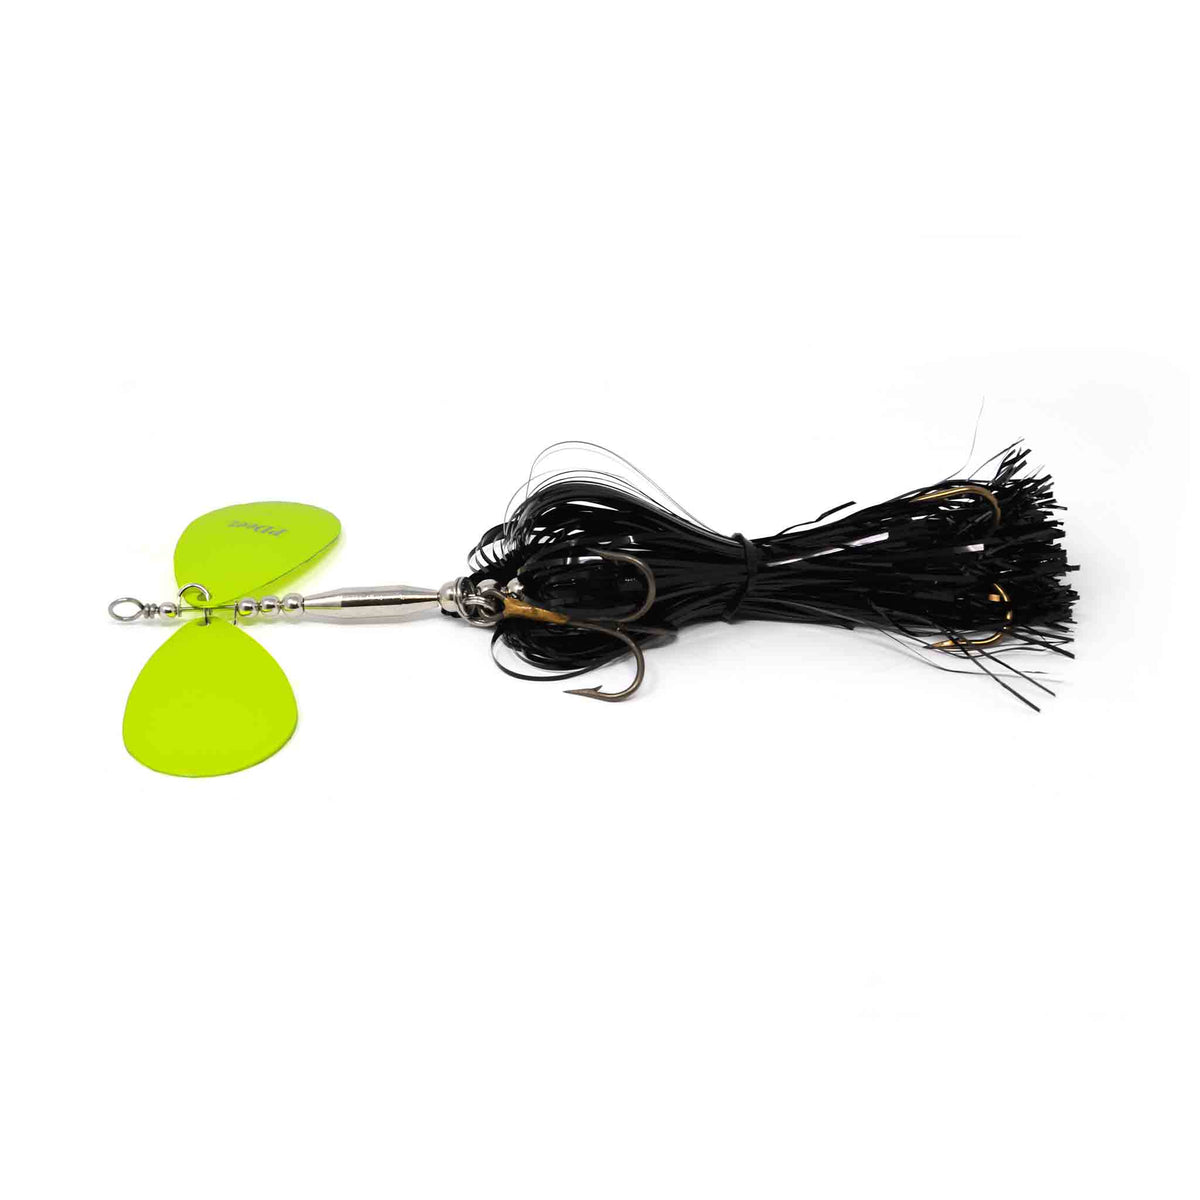 Ardea Big mouse Pike Bait fishing lure bucktail tail Silicone lure